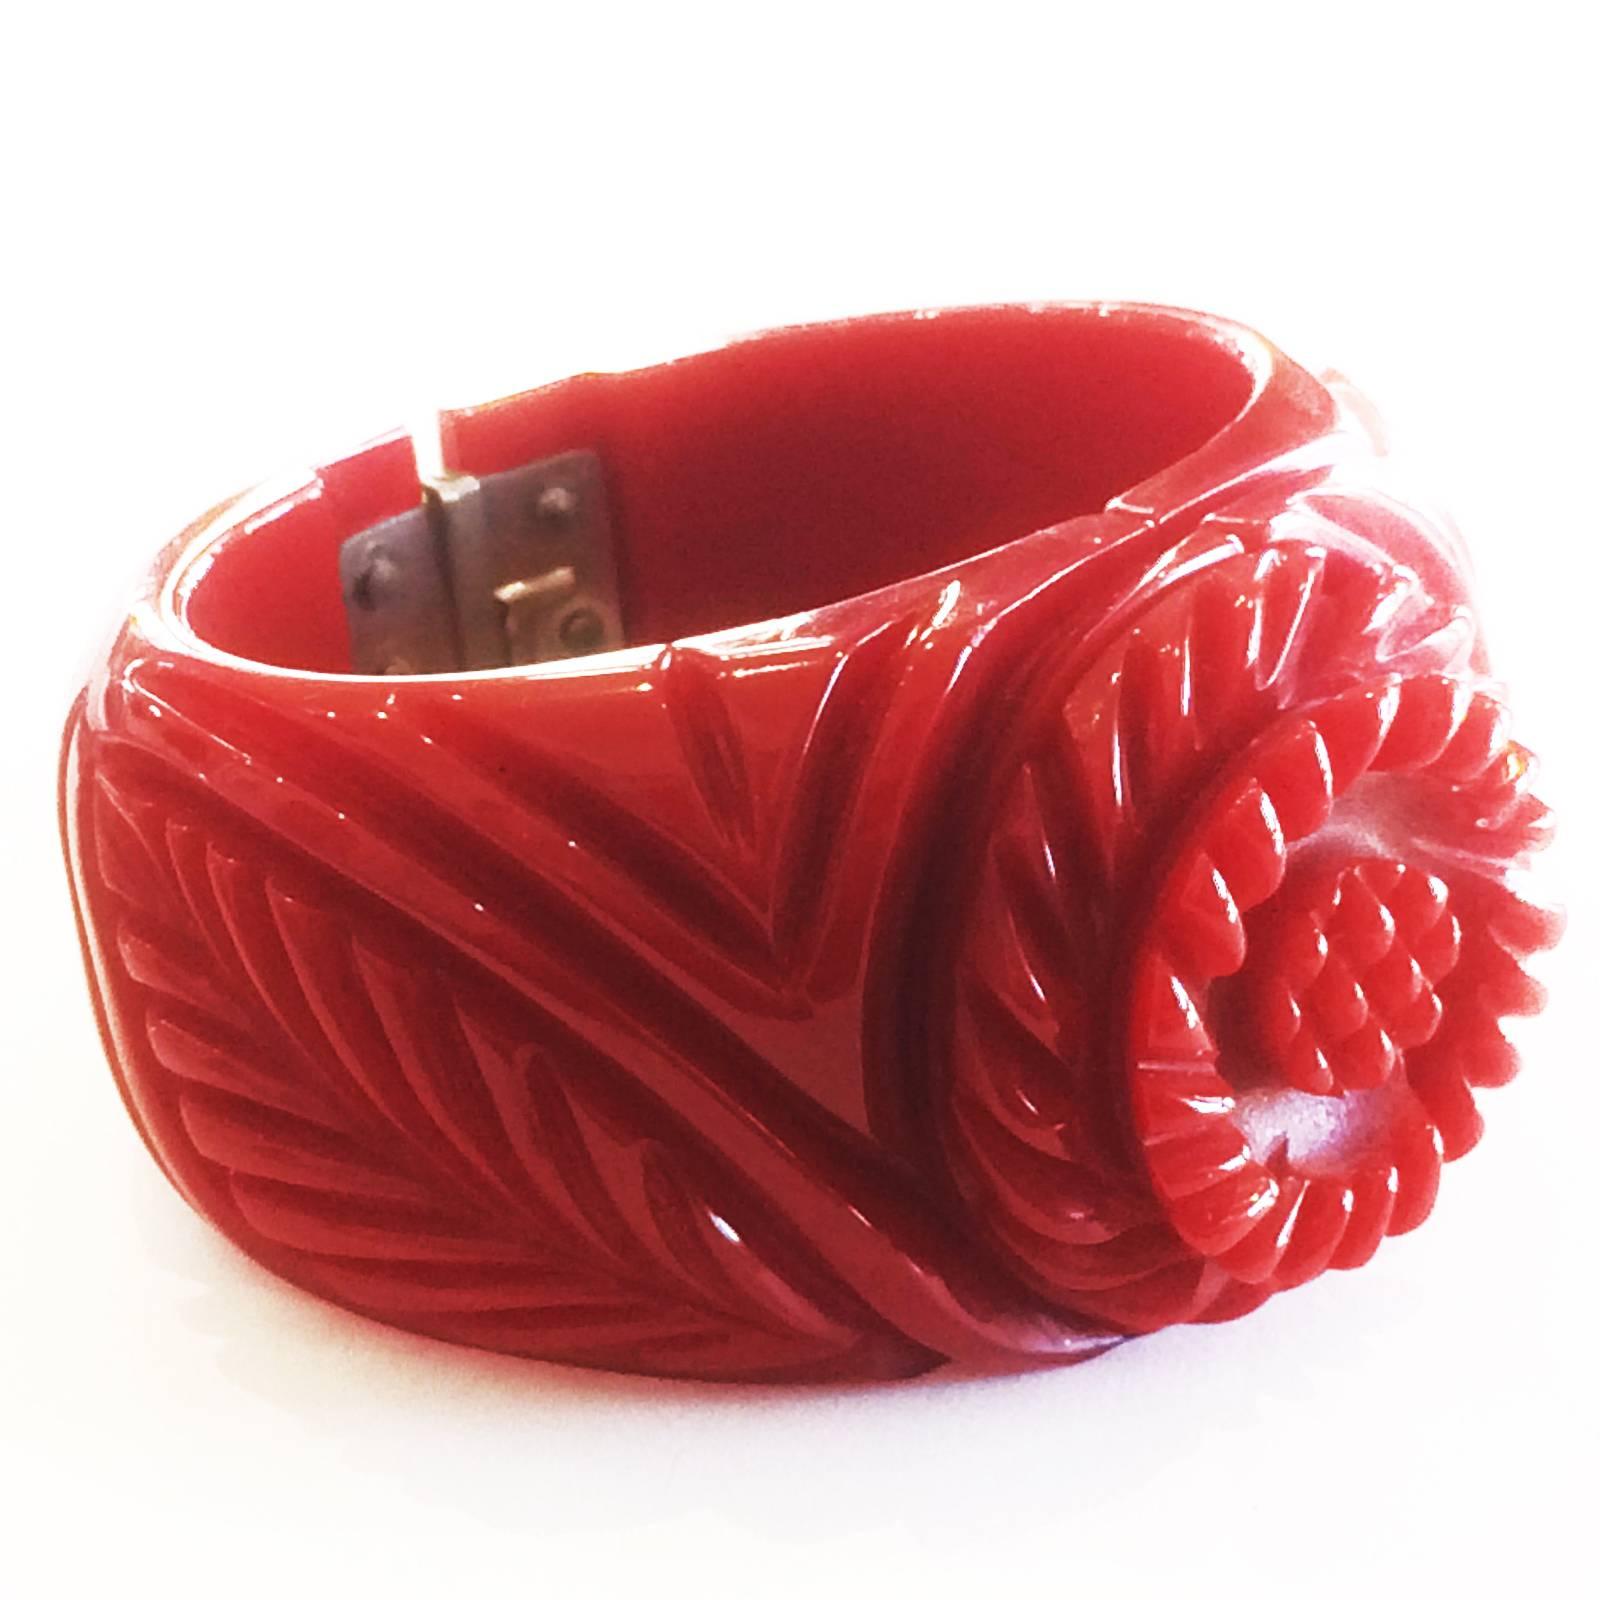 Art Deco, unusual, deeply Carved Bangle, in sold Lipstick Red Bakelite, in form of central Flower with leaves to left and right. The flower overlaps the joint of the other side, and some of the carving is up to 5mm deep. All in perfect condition,